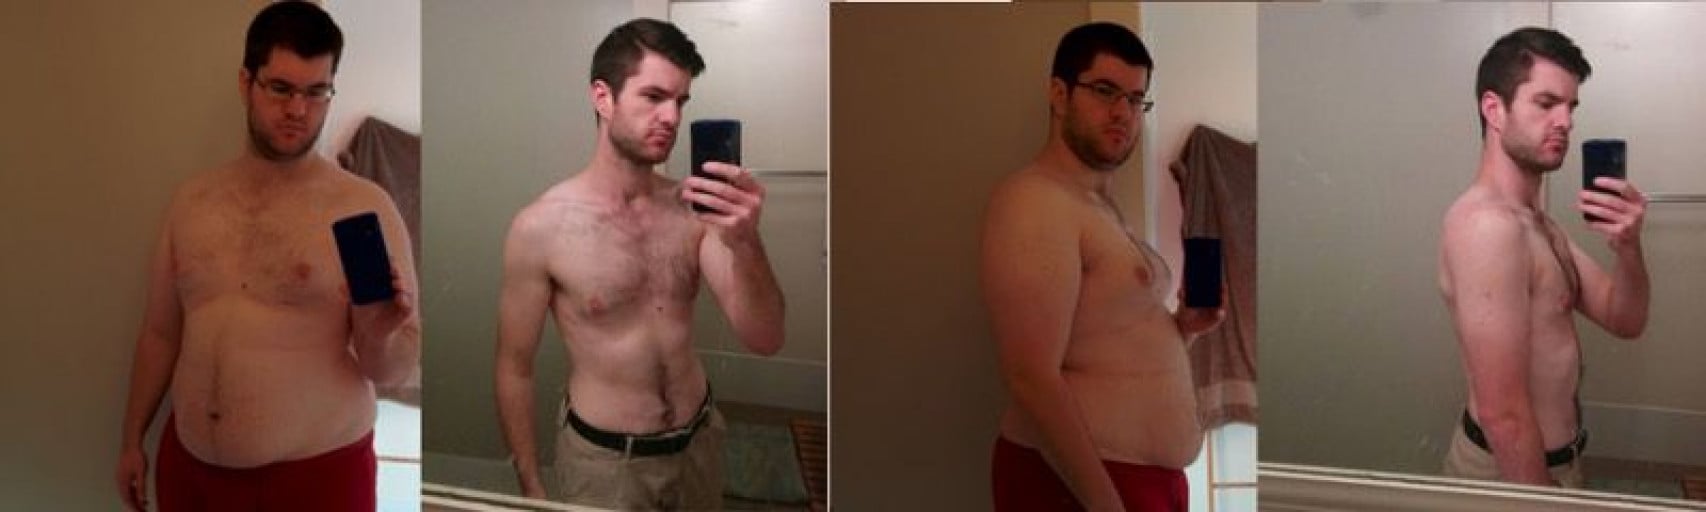 A before and after photo of a 6'0" male showing a weight reduction from 330 pounds to 182 pounds. A total loss of 148 pounds.